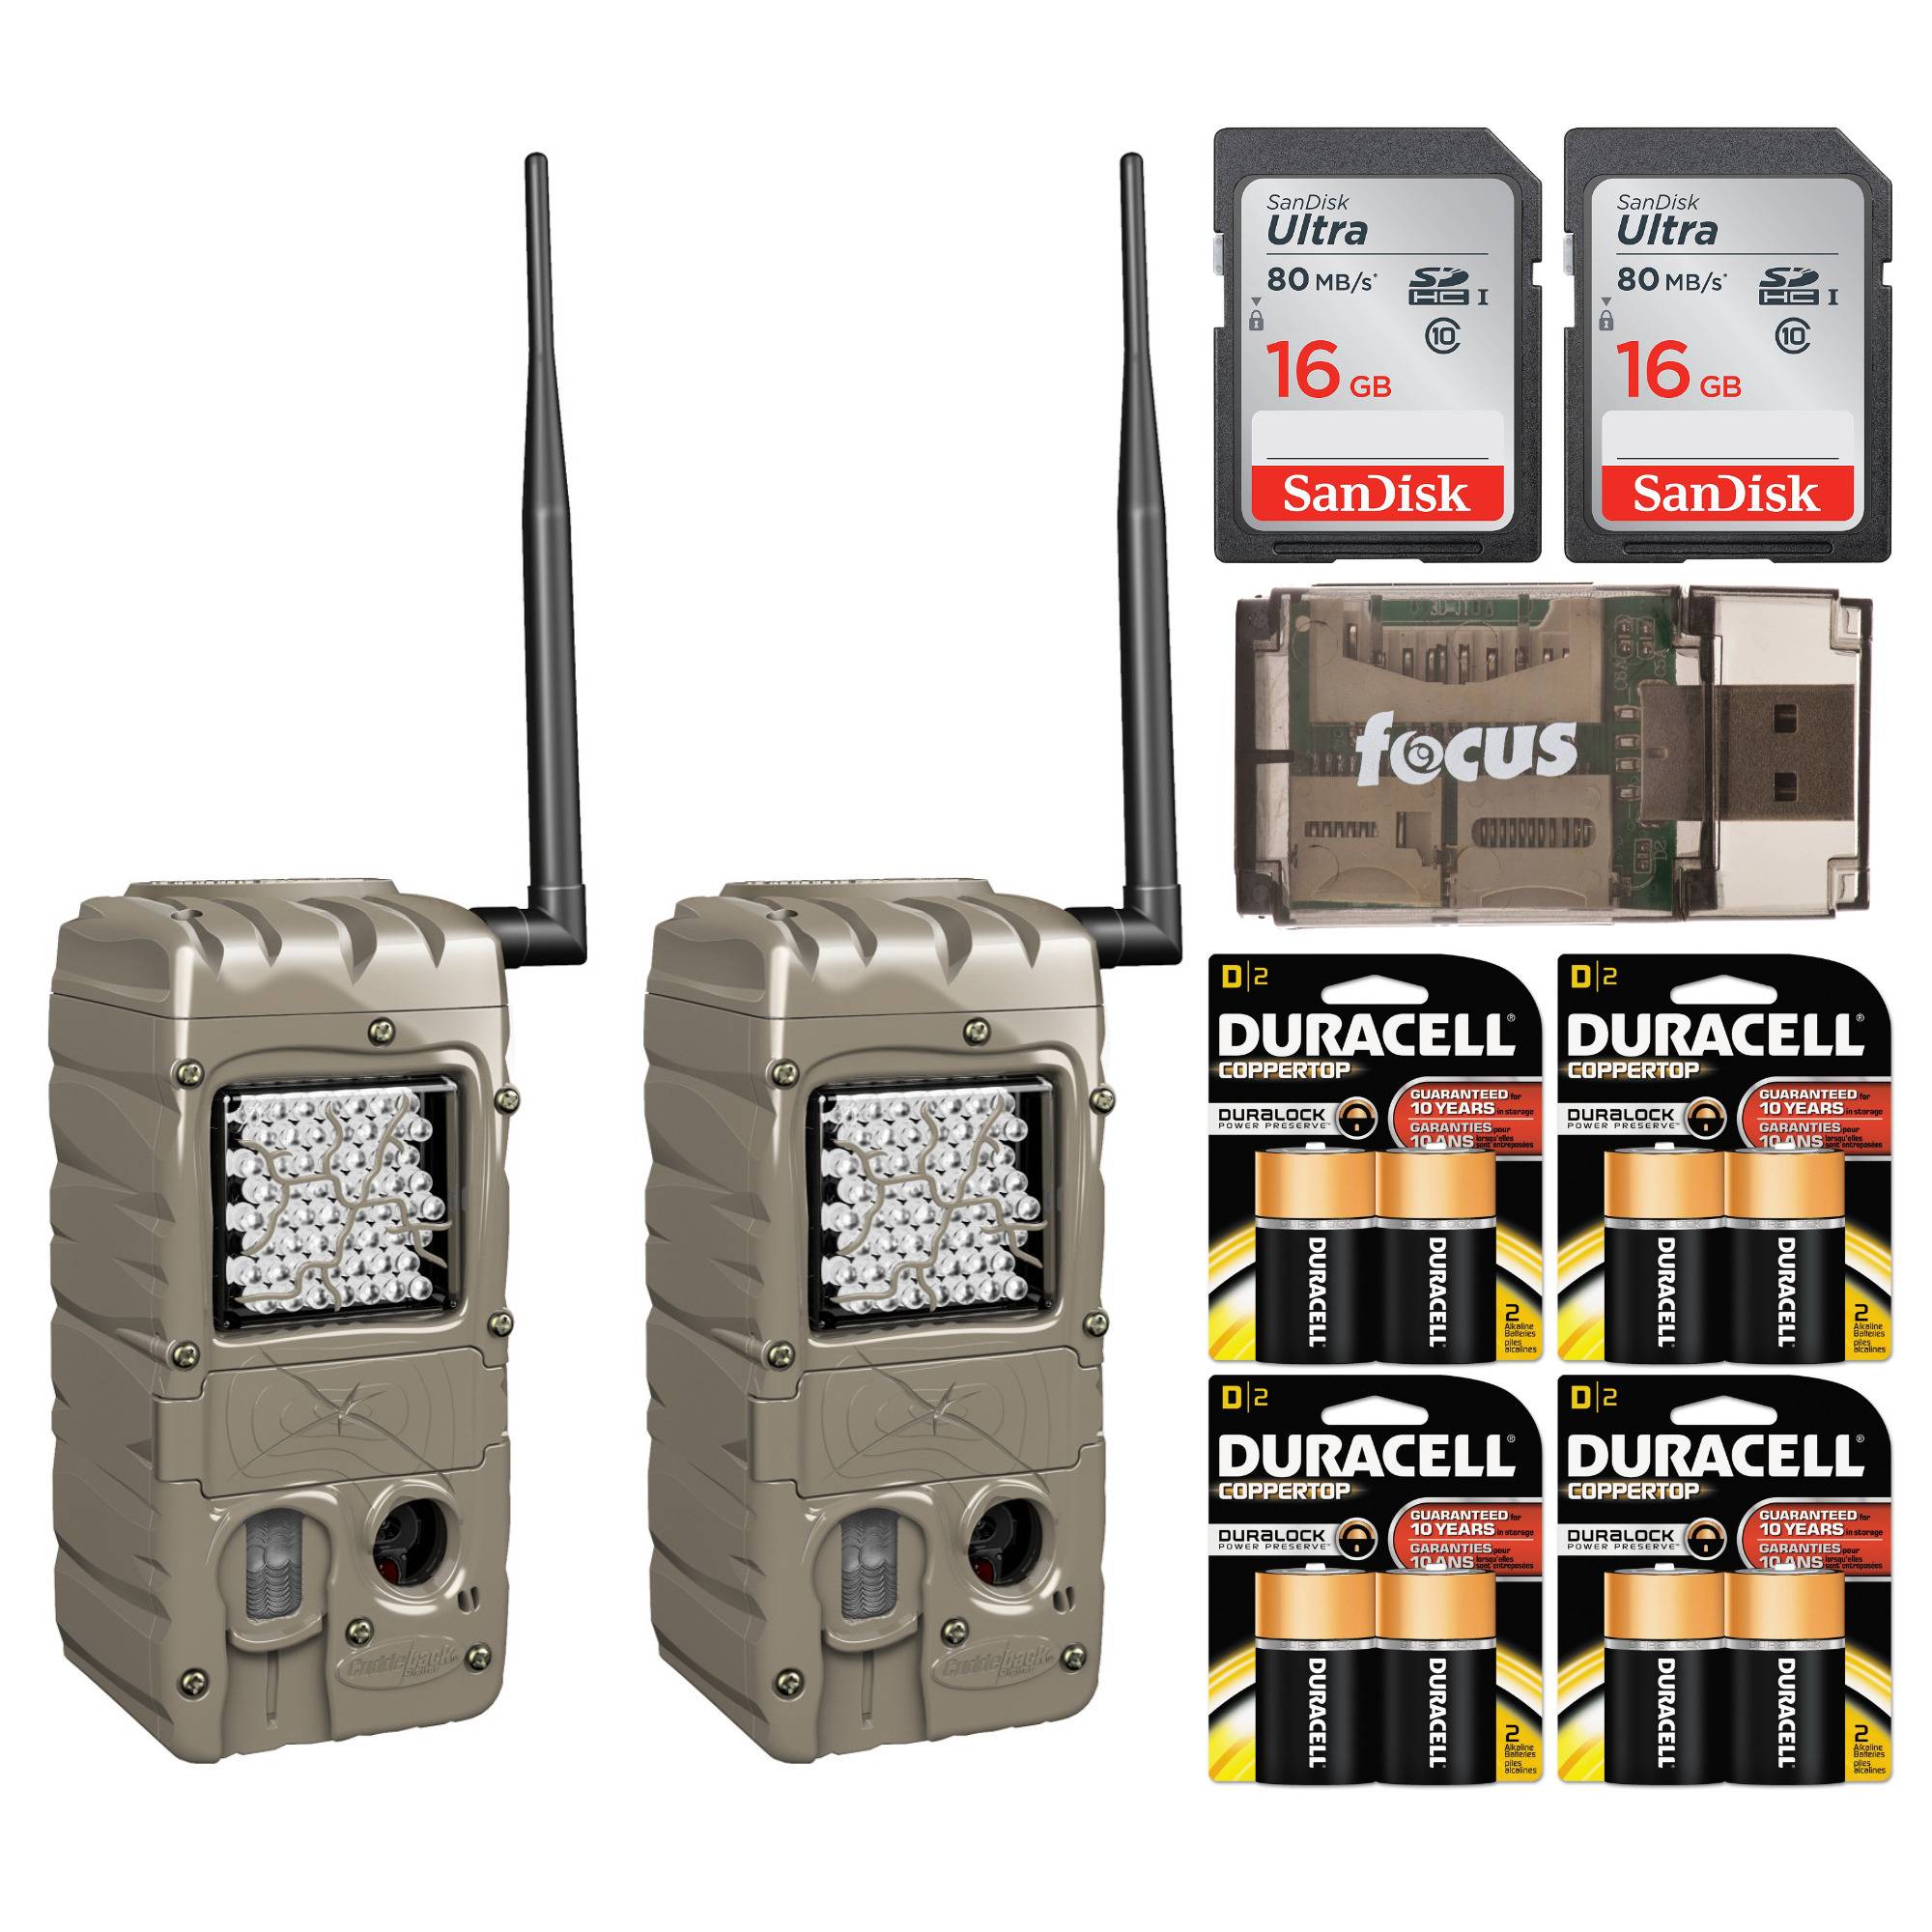 Cuddeback CuddeLink Power House IR 20MP Trail Camera (2-Pack) with Batteries and 16GB SD Card Bundle